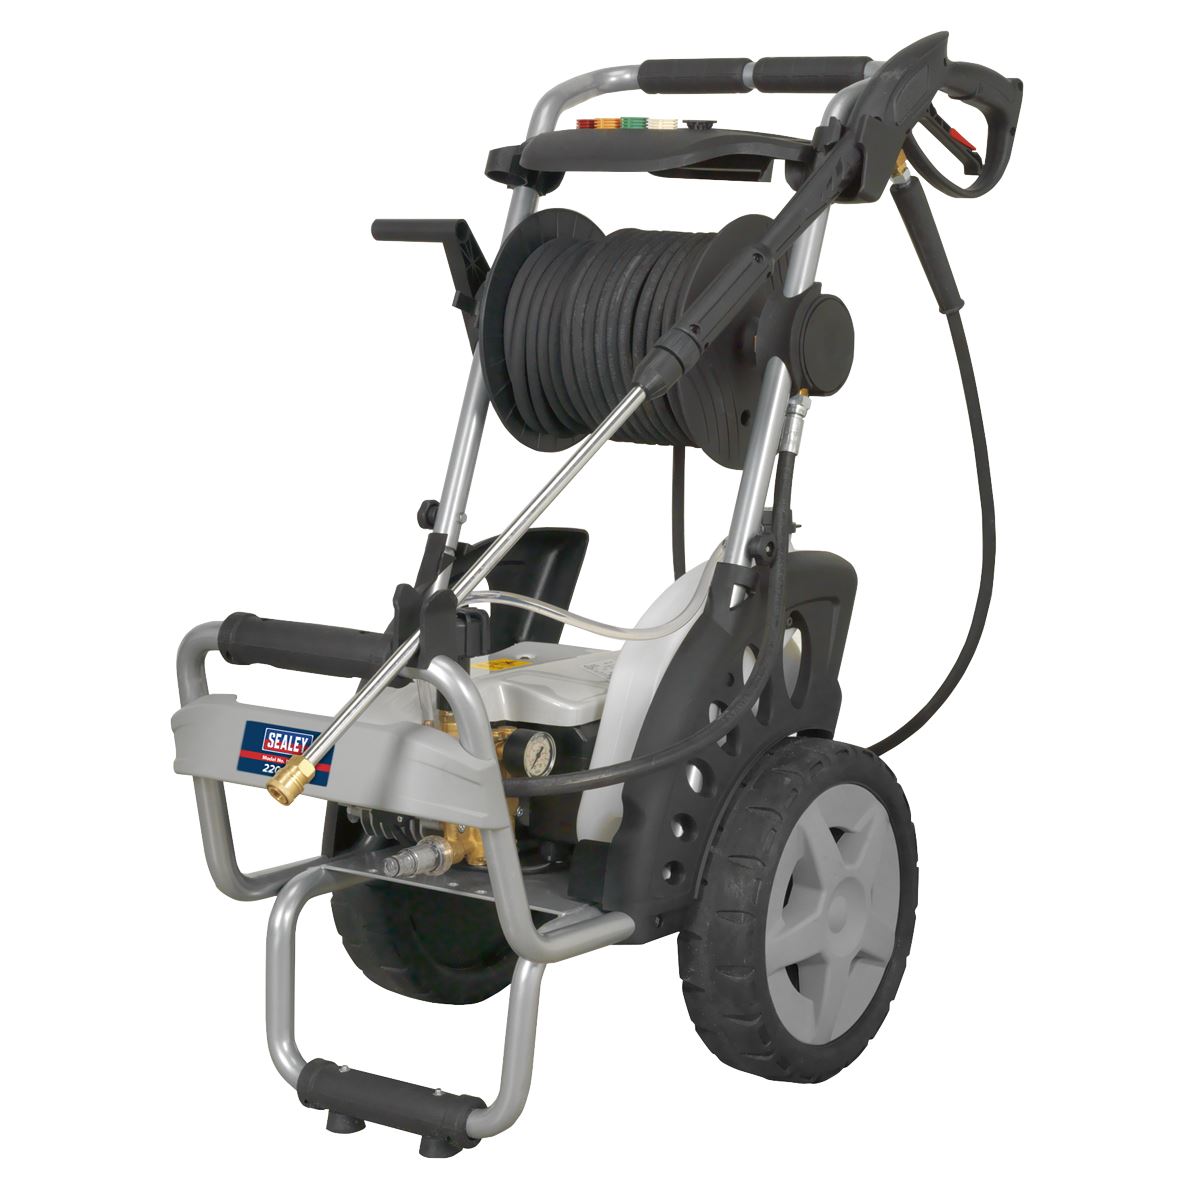 Sealey Professional Pressure Washer 150bar with Accessories